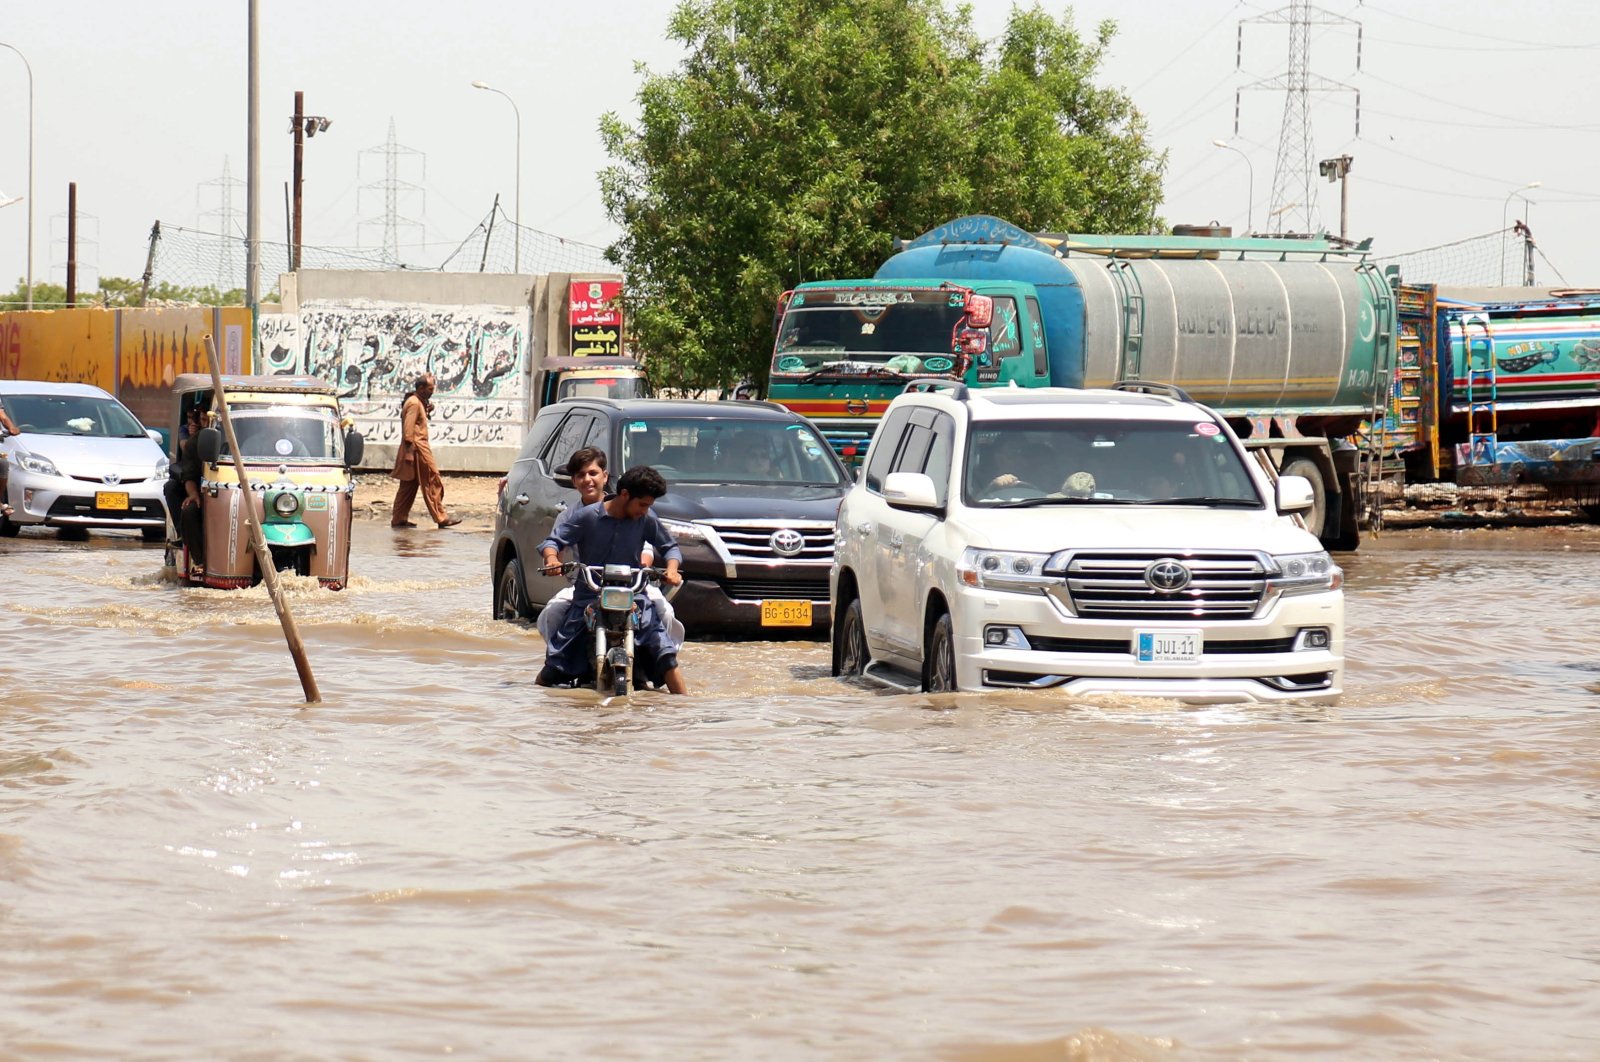 People make their way through a flooded area after heavy monsoon rains in Karachi, Pakistan, July 12, 2022. (EPA File Photo)